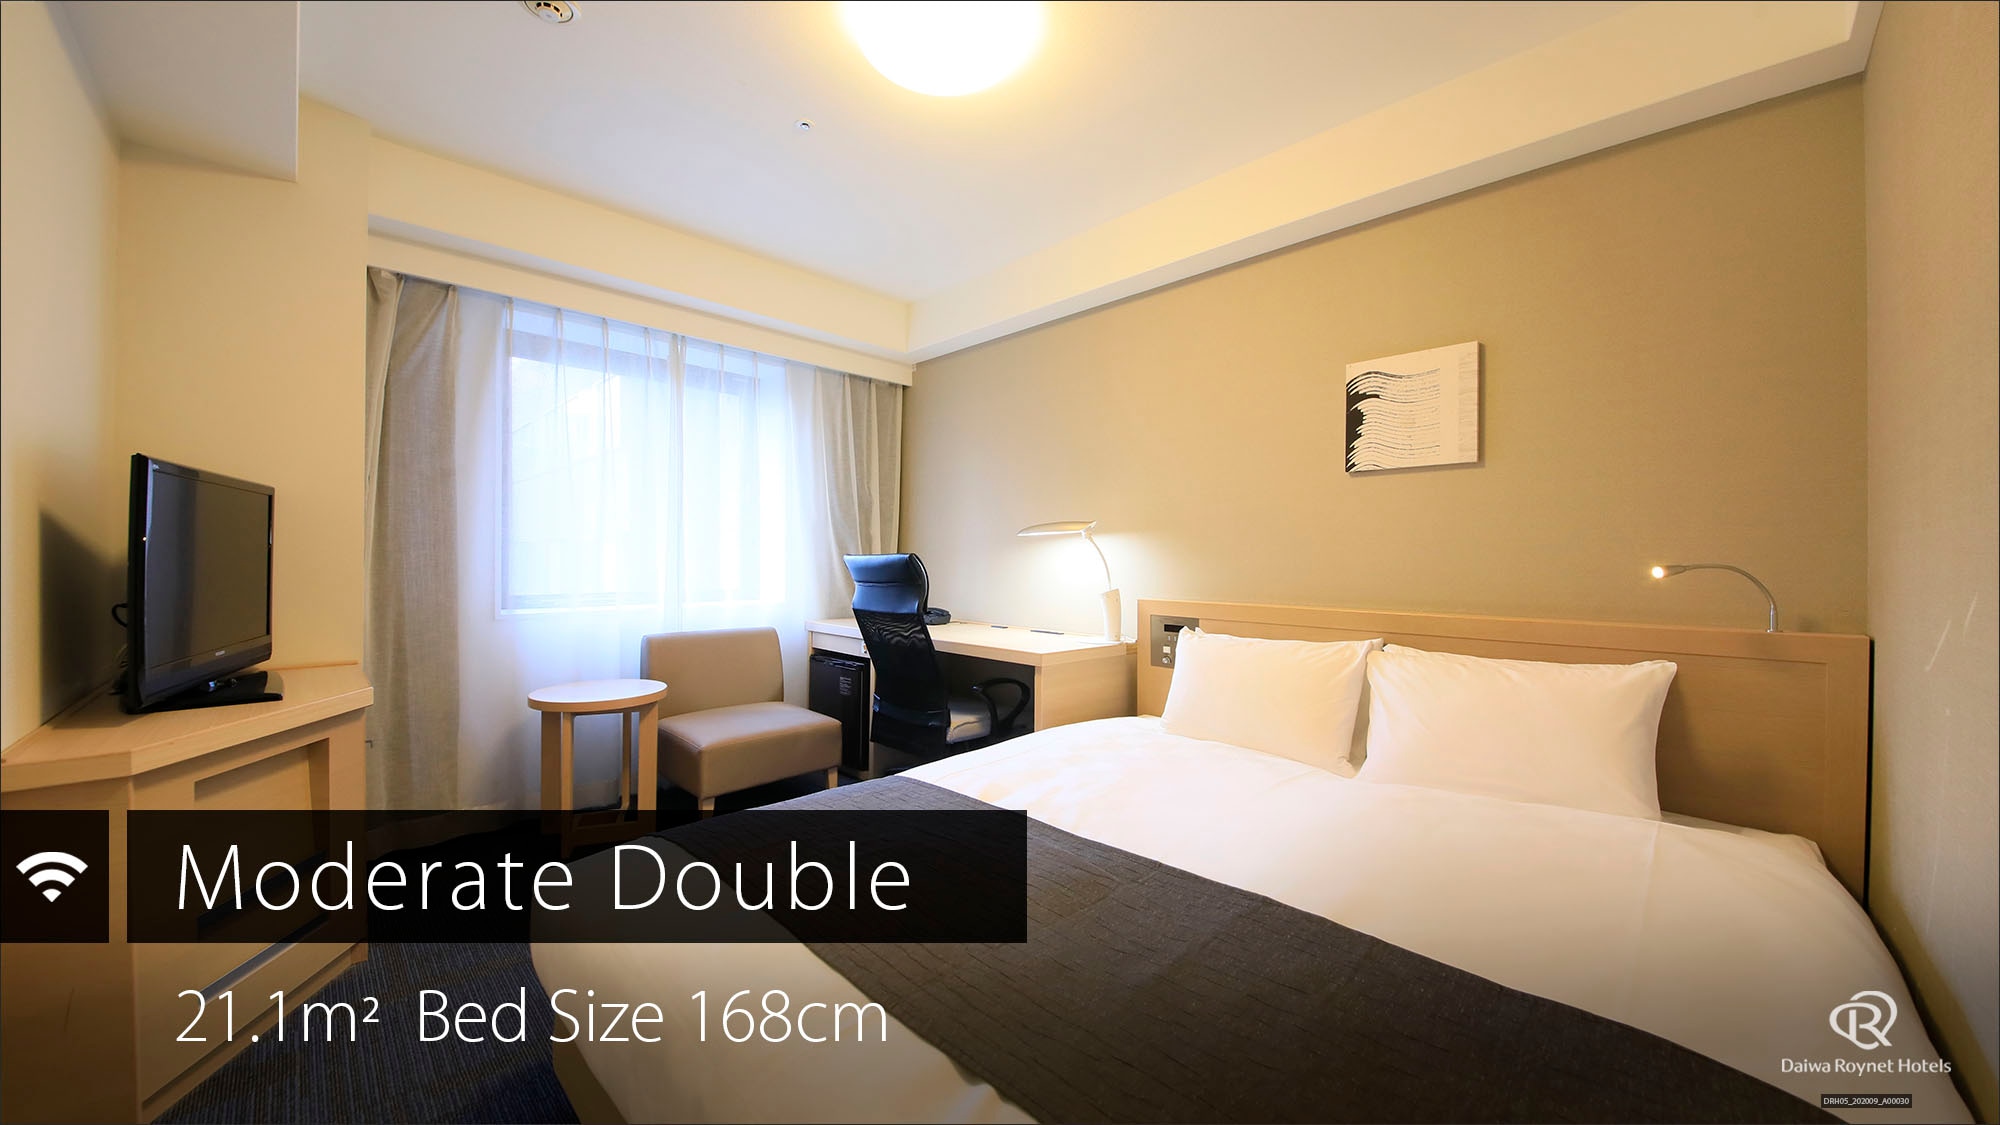 Moderate double room